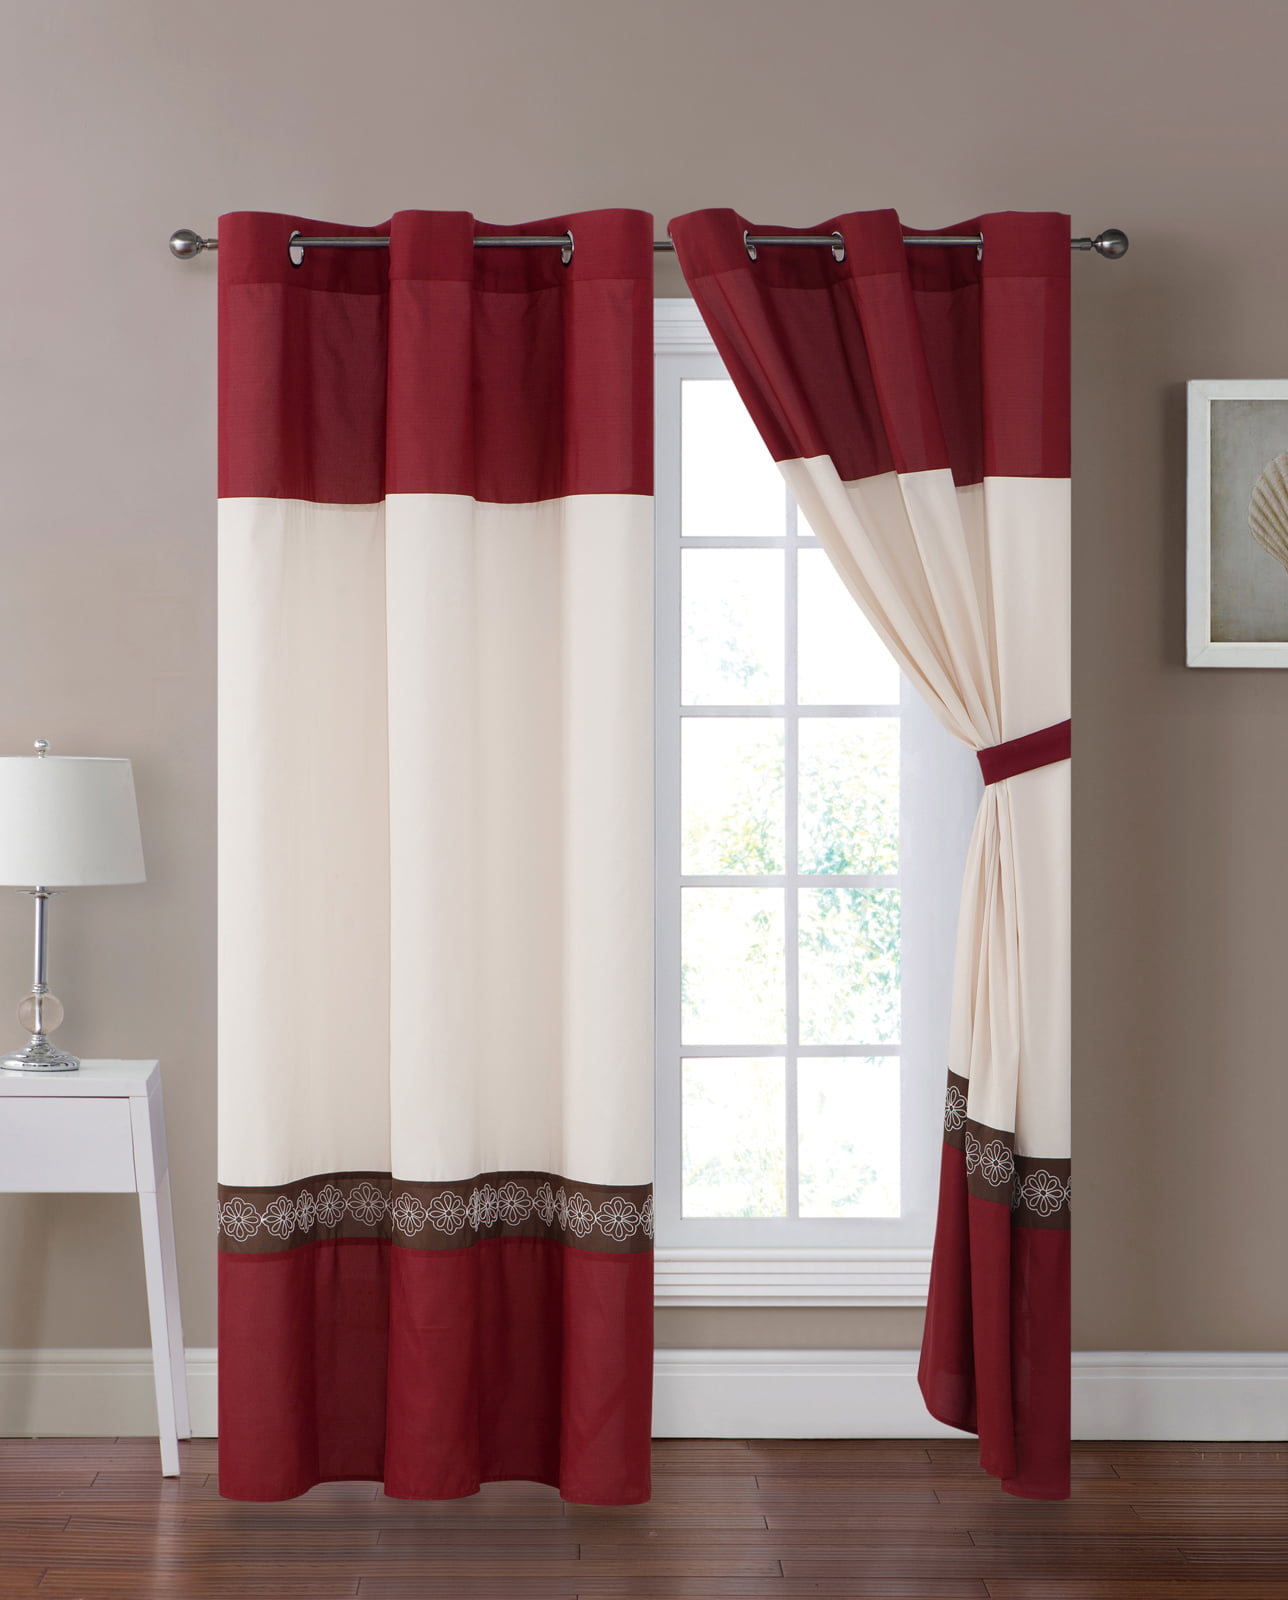 Details about   4-Pc Floral Blossom Vine Scroll Embroidery Curtain Set Ivory Red Drape Valance 